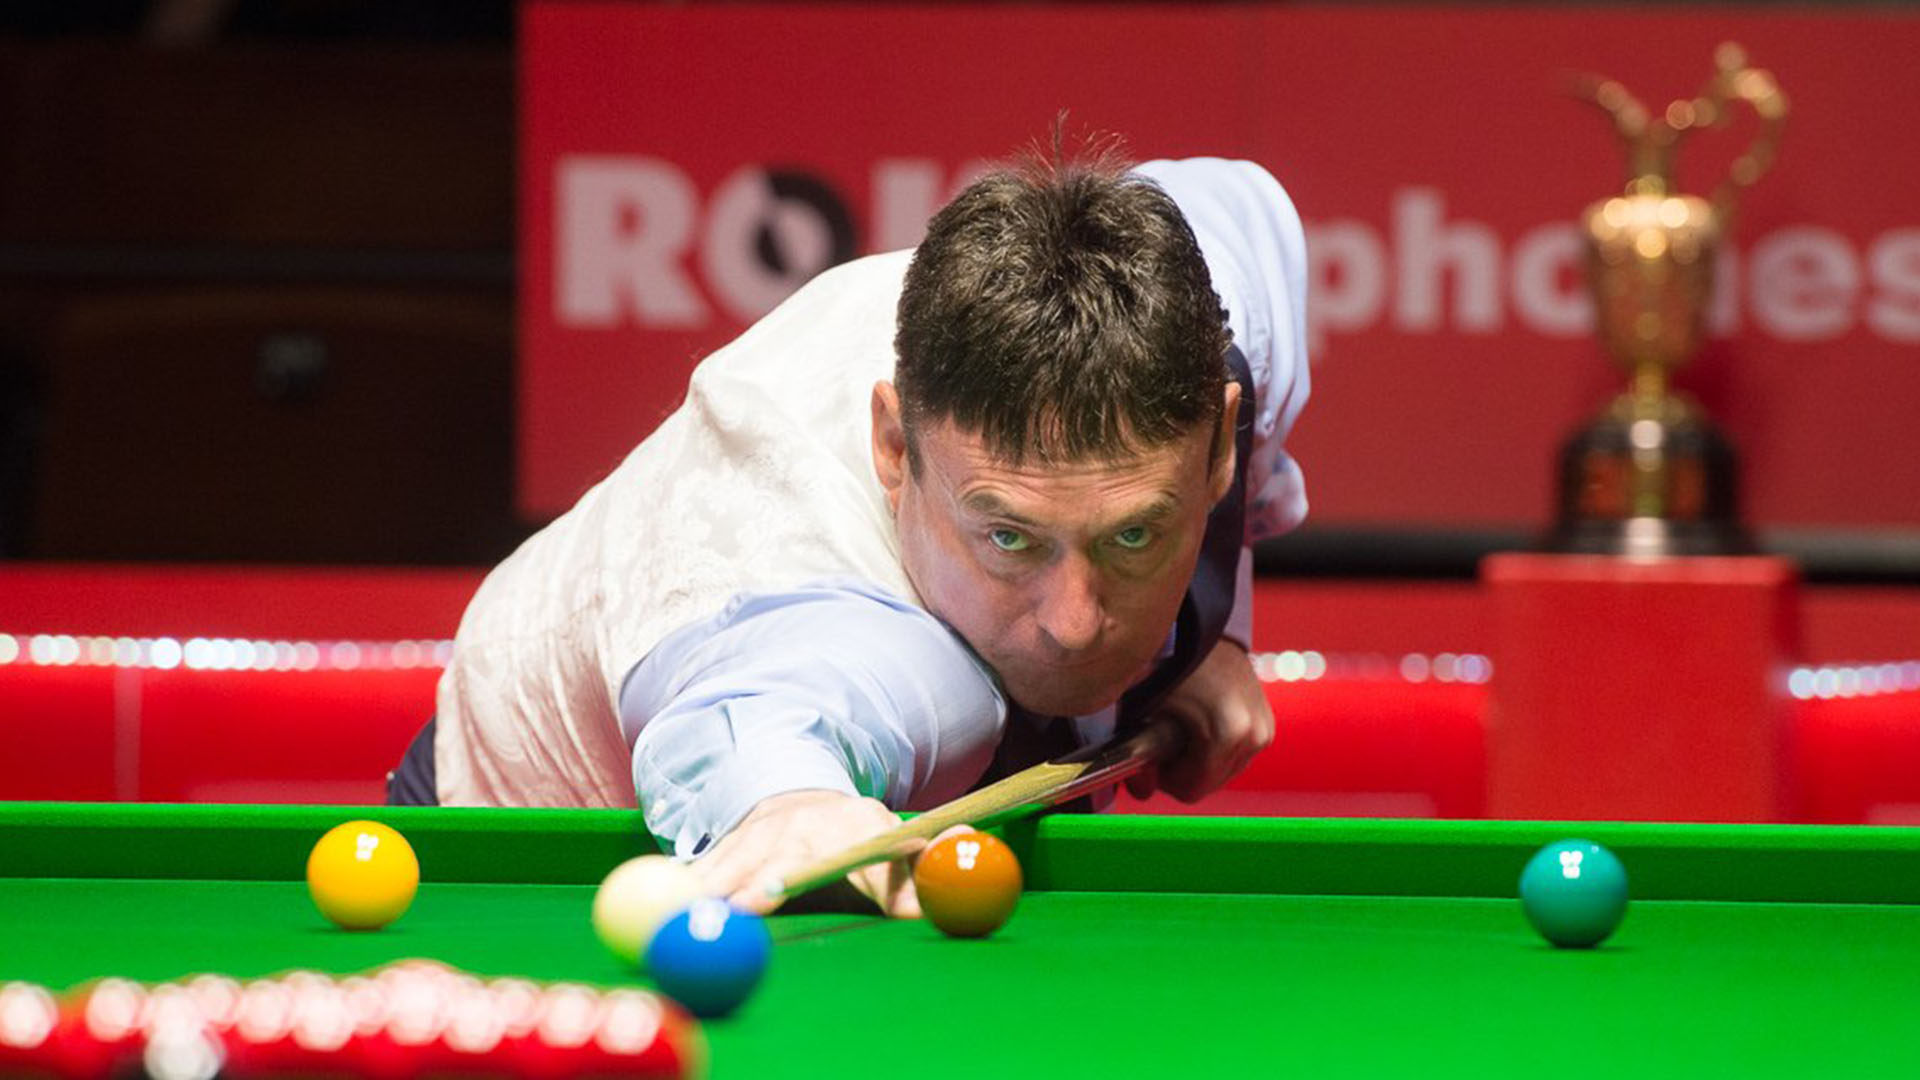 Snooker results Jimmy White finally wins a Crucible title after triumphing at the World Seniors Championship